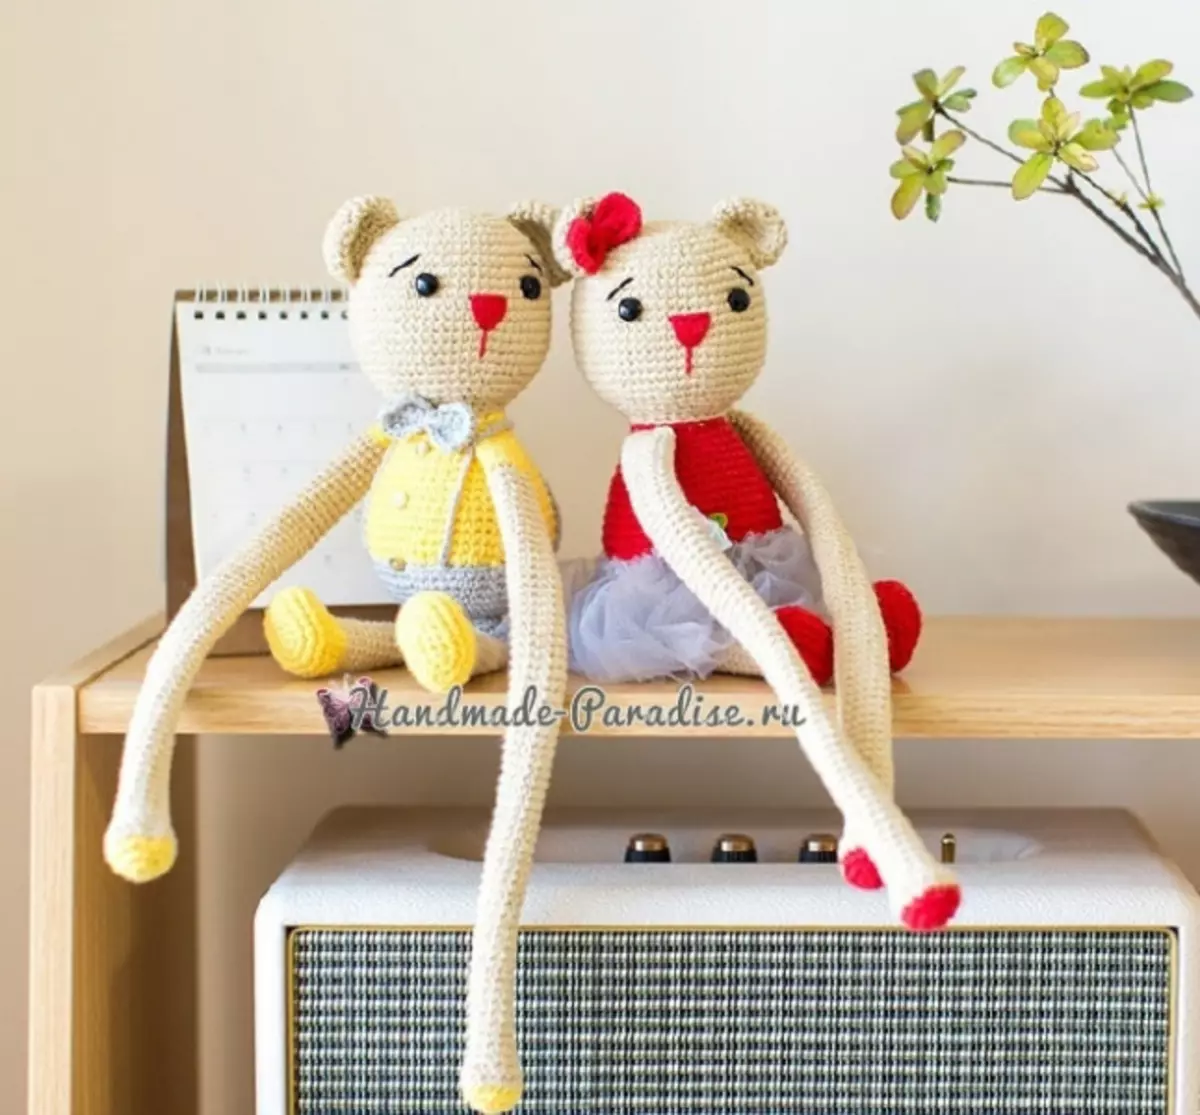 Knitted bears - pickups for curtains in a nursery